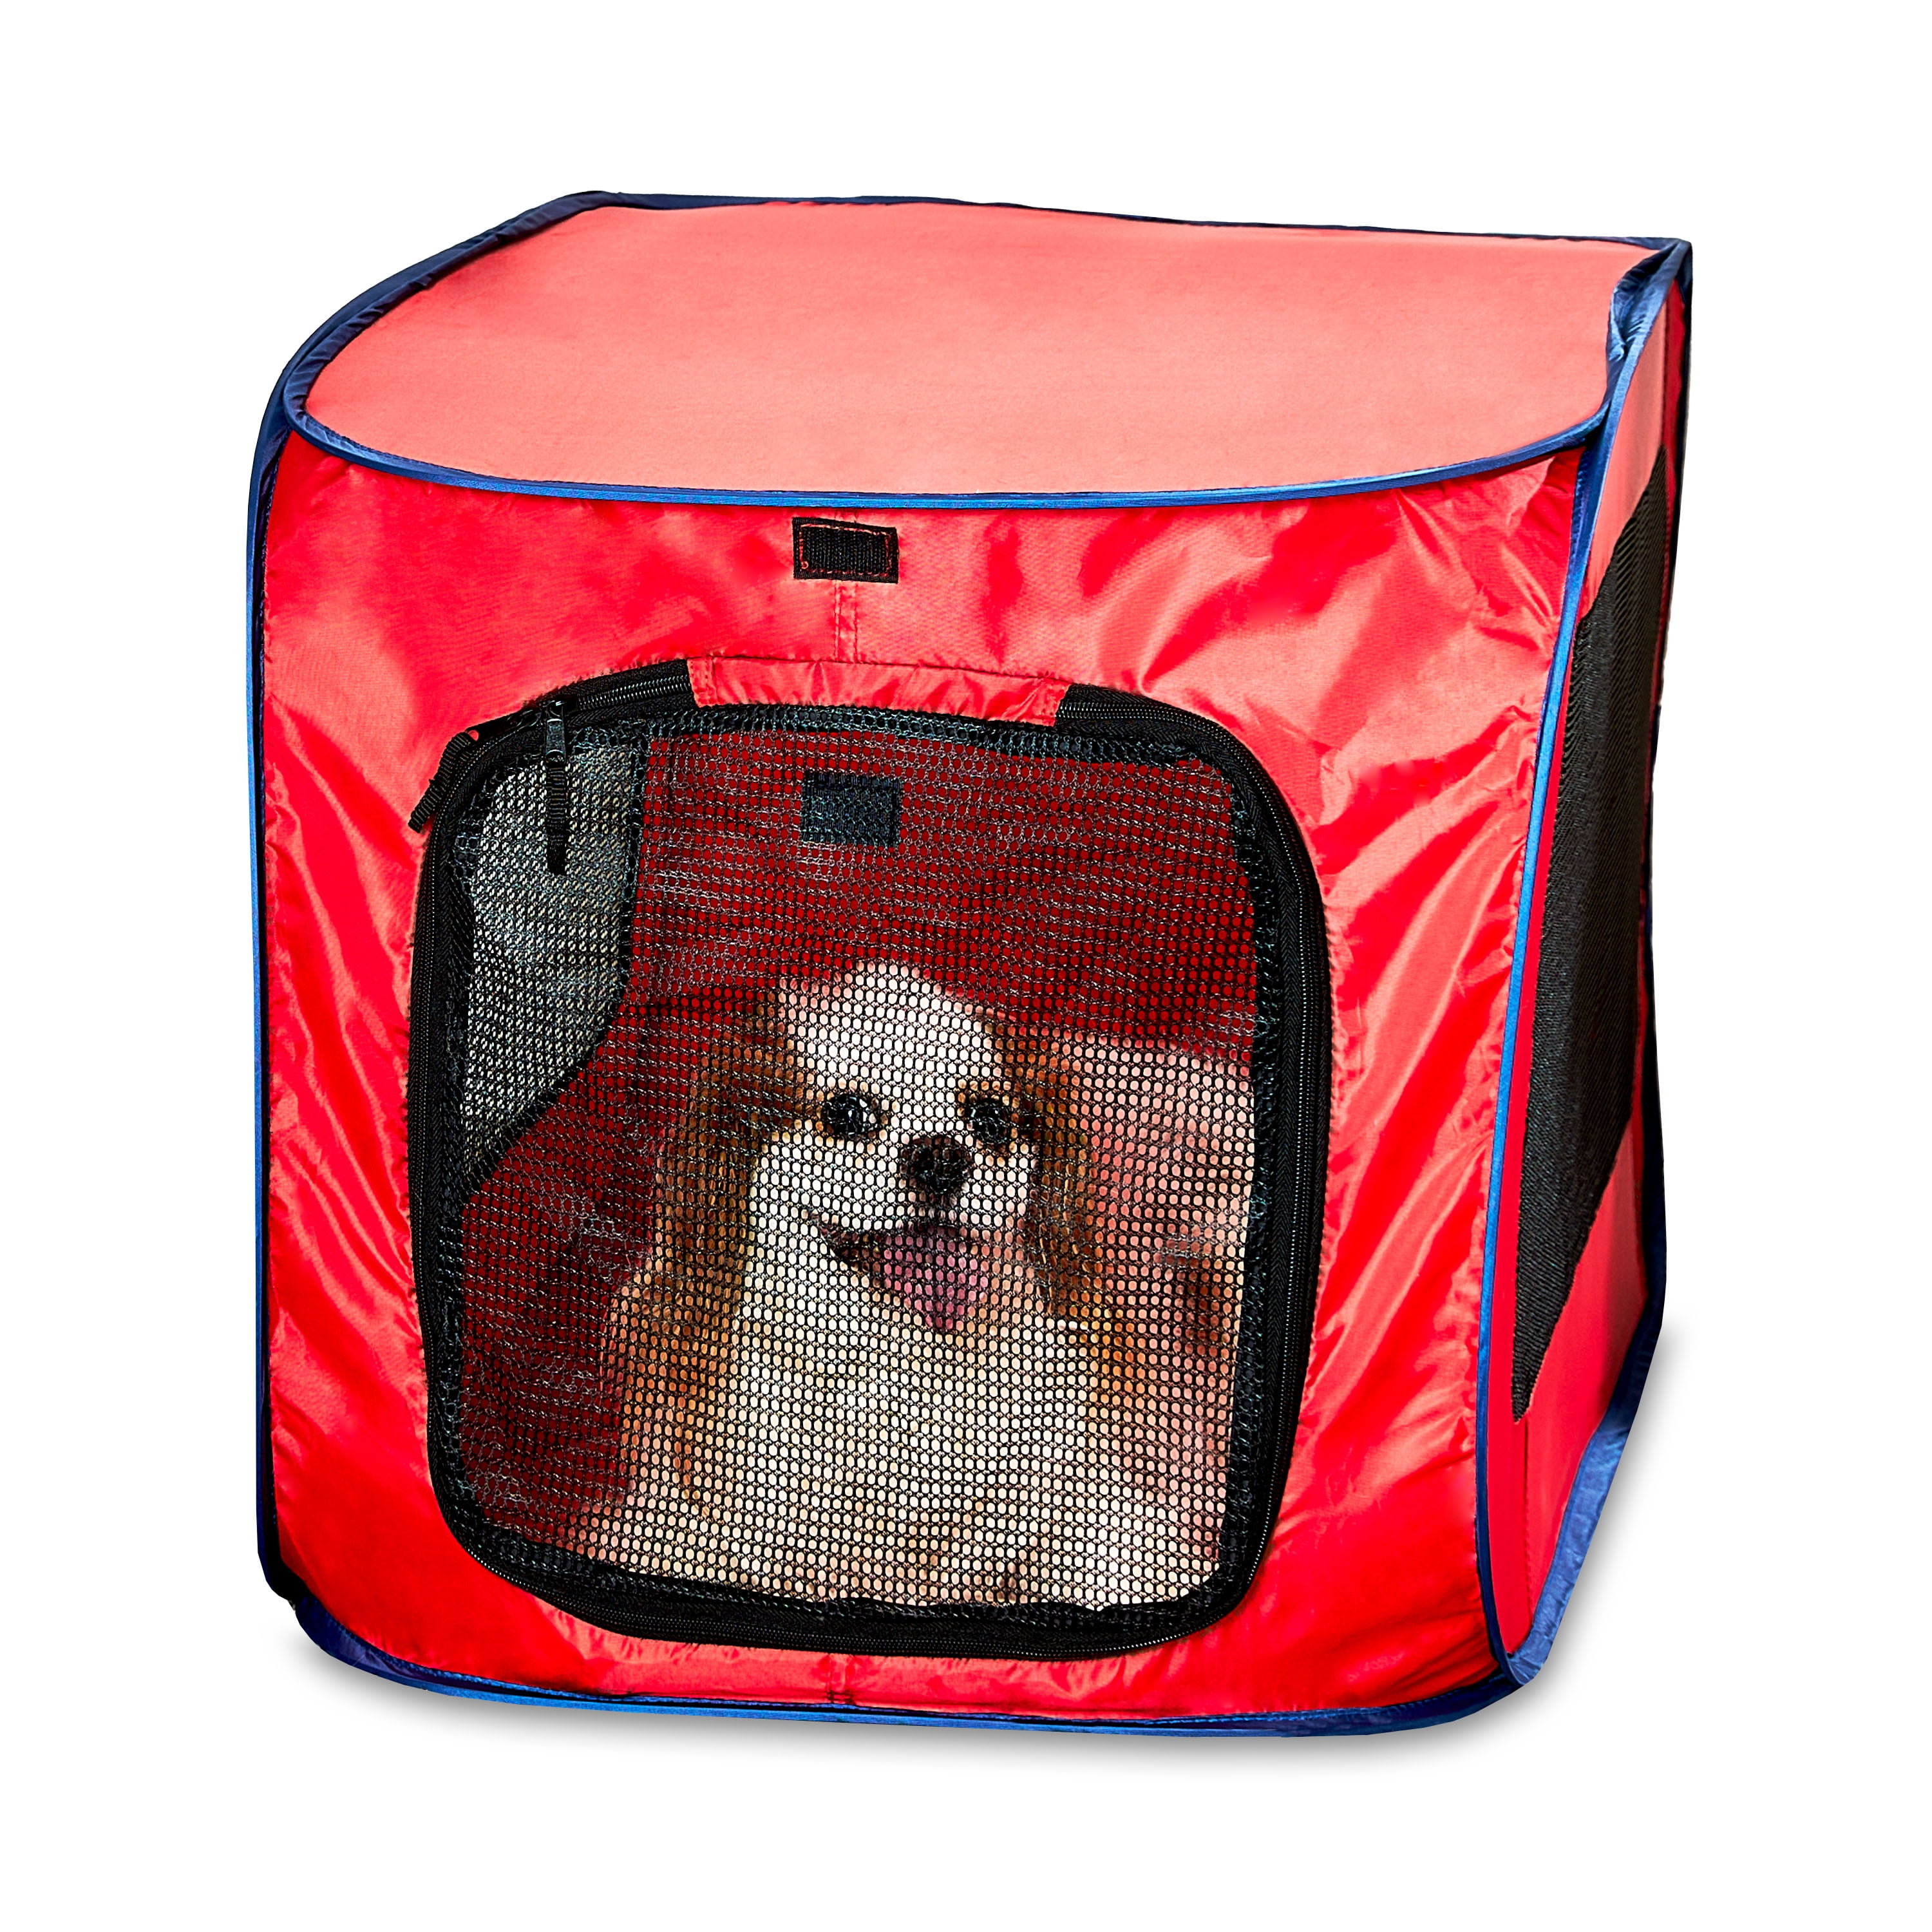 Vibrant Life 32" x 19.5" Soft-Sided Collapsible Pop Open Travel Kennel/Carrier, Dogs, Cats, Small Animals, Medium, Red Walmart.com